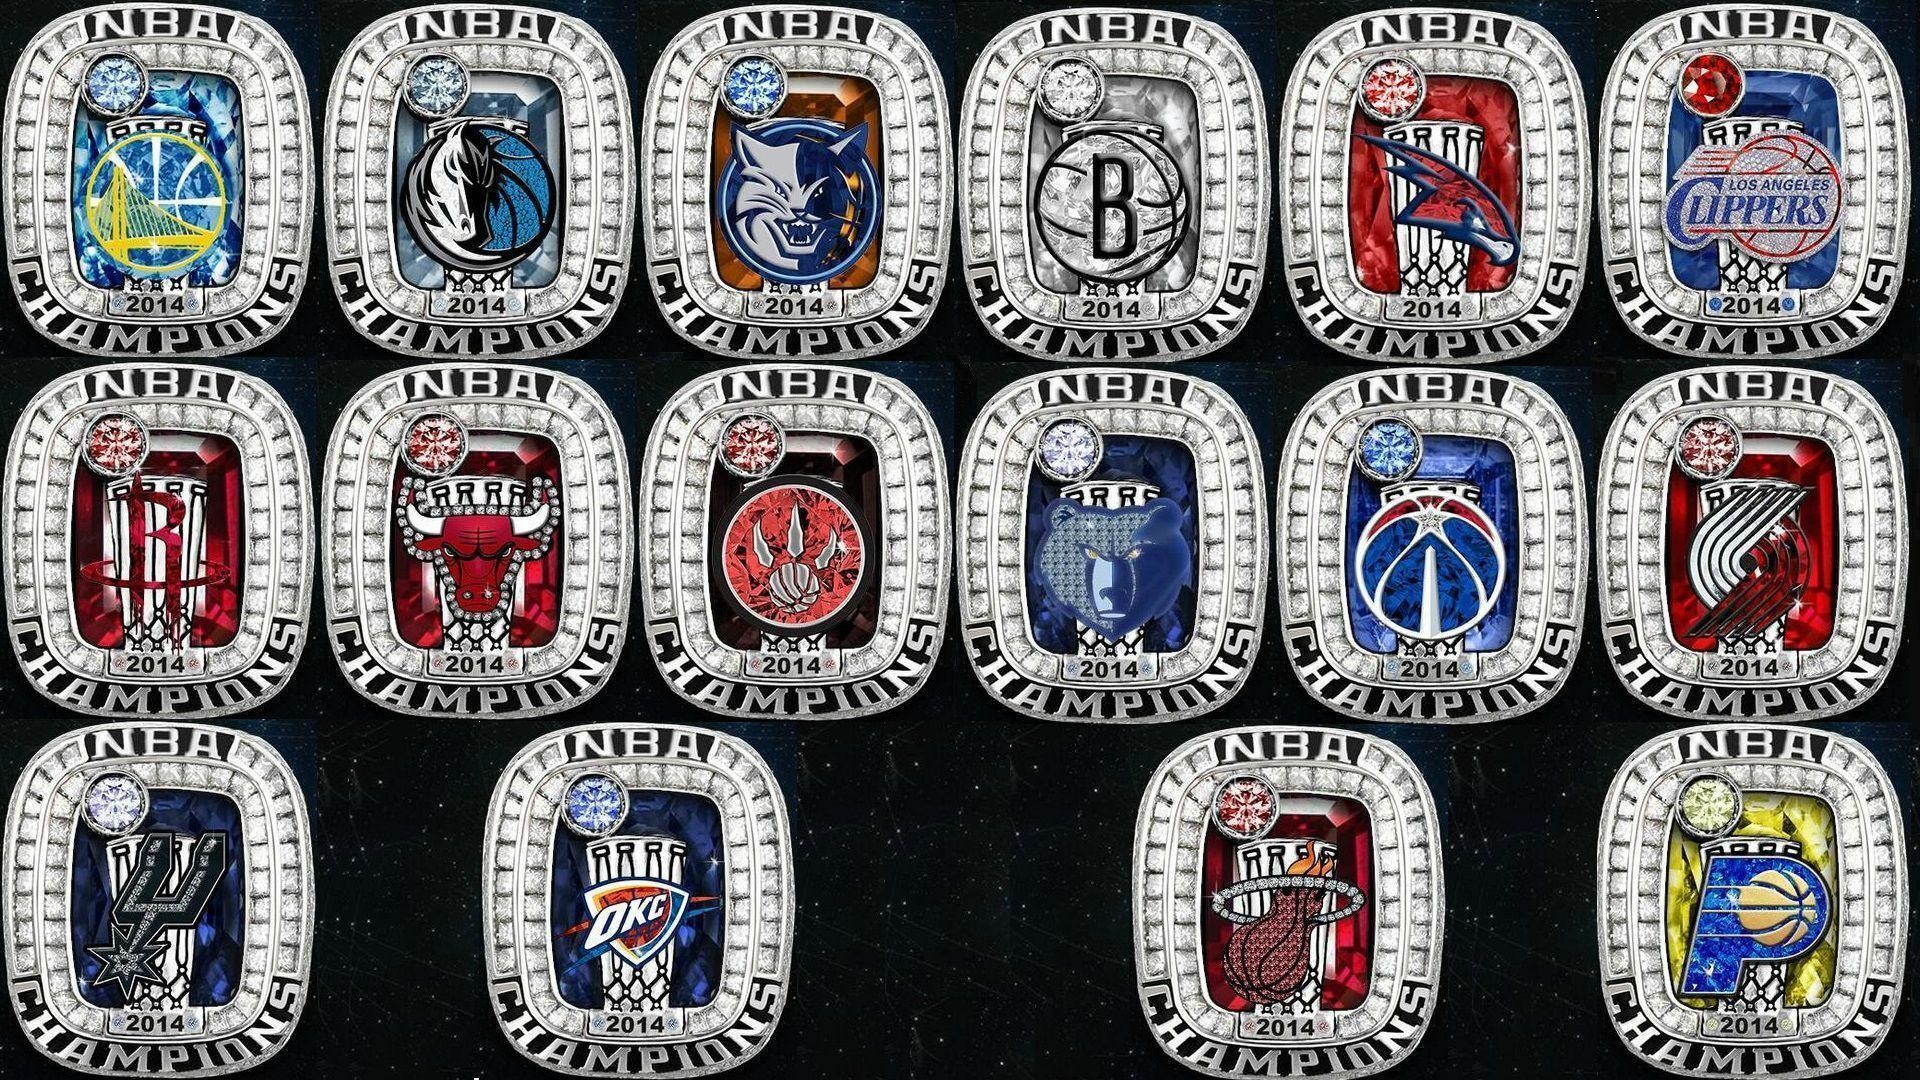 1920x1080 The NBA tweeted out 2014 championship rings for each team : nba